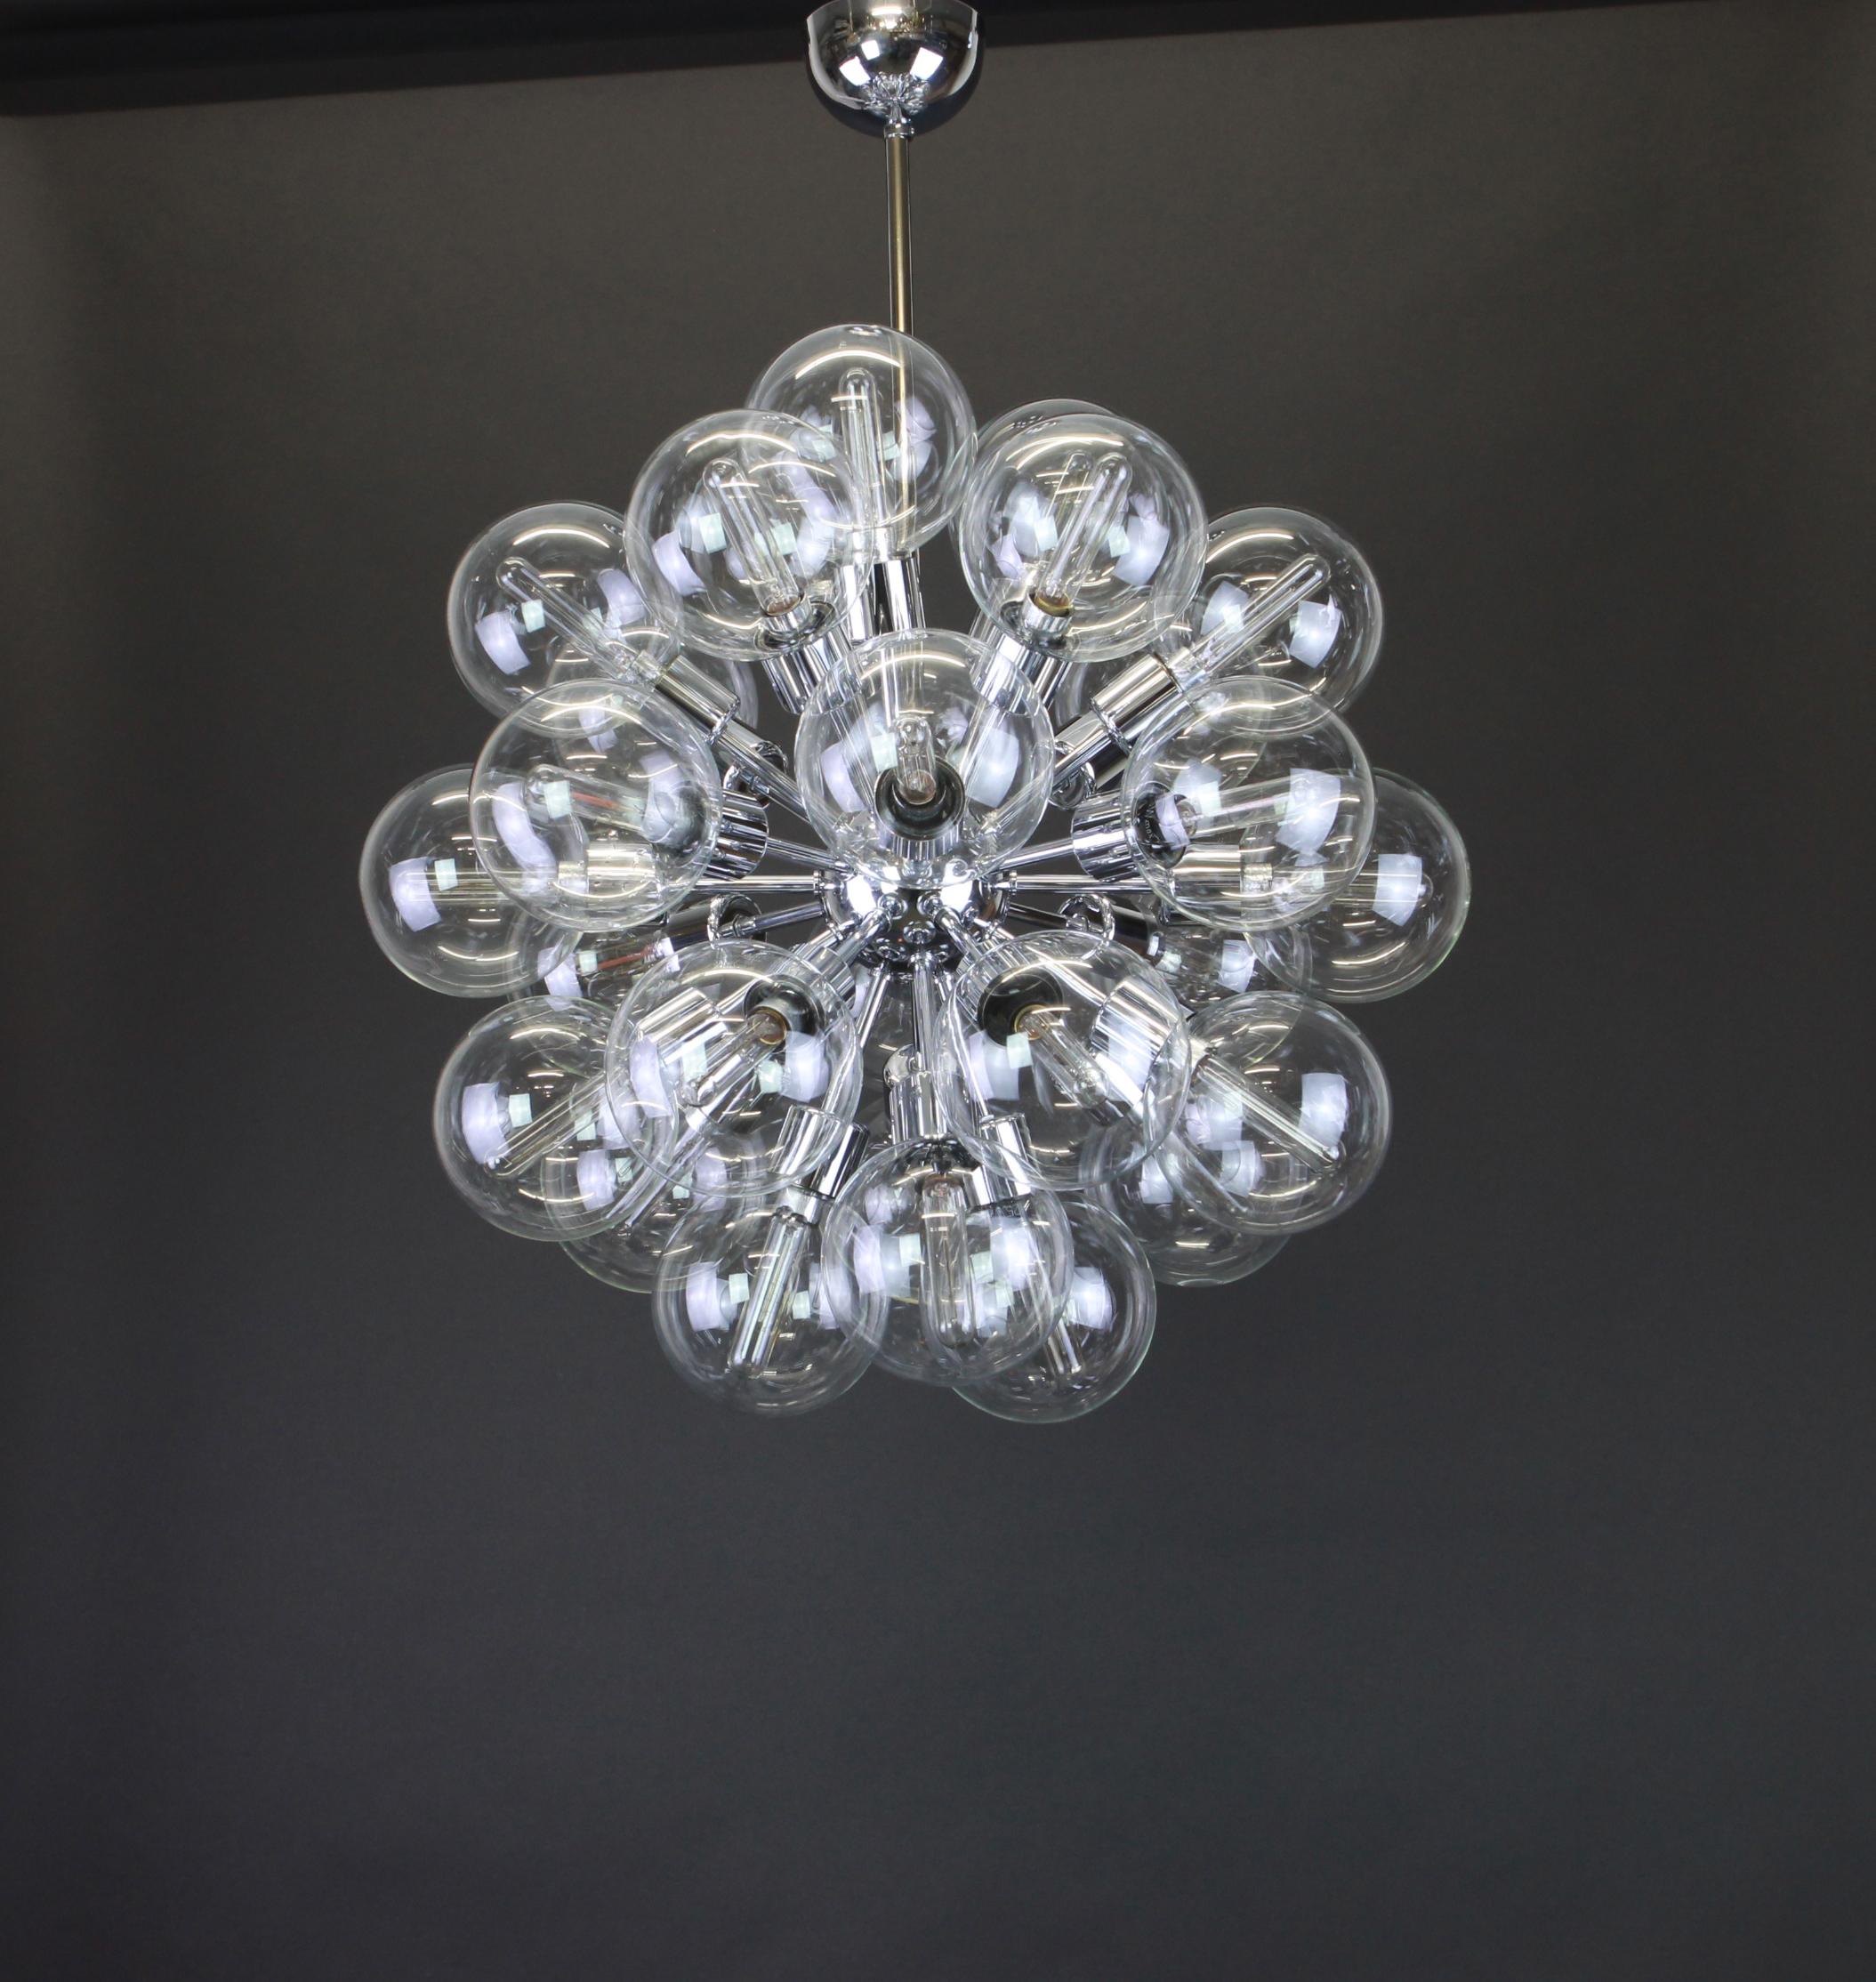 Beautiful large starburst chrome chandelier designed by Motoko Ishii for Staff Leuchten, manufactured in Germany, circa the 1960s.
It features a chrome frame with (28) transparent blown glass globes surrounding the frame creating a spectacular